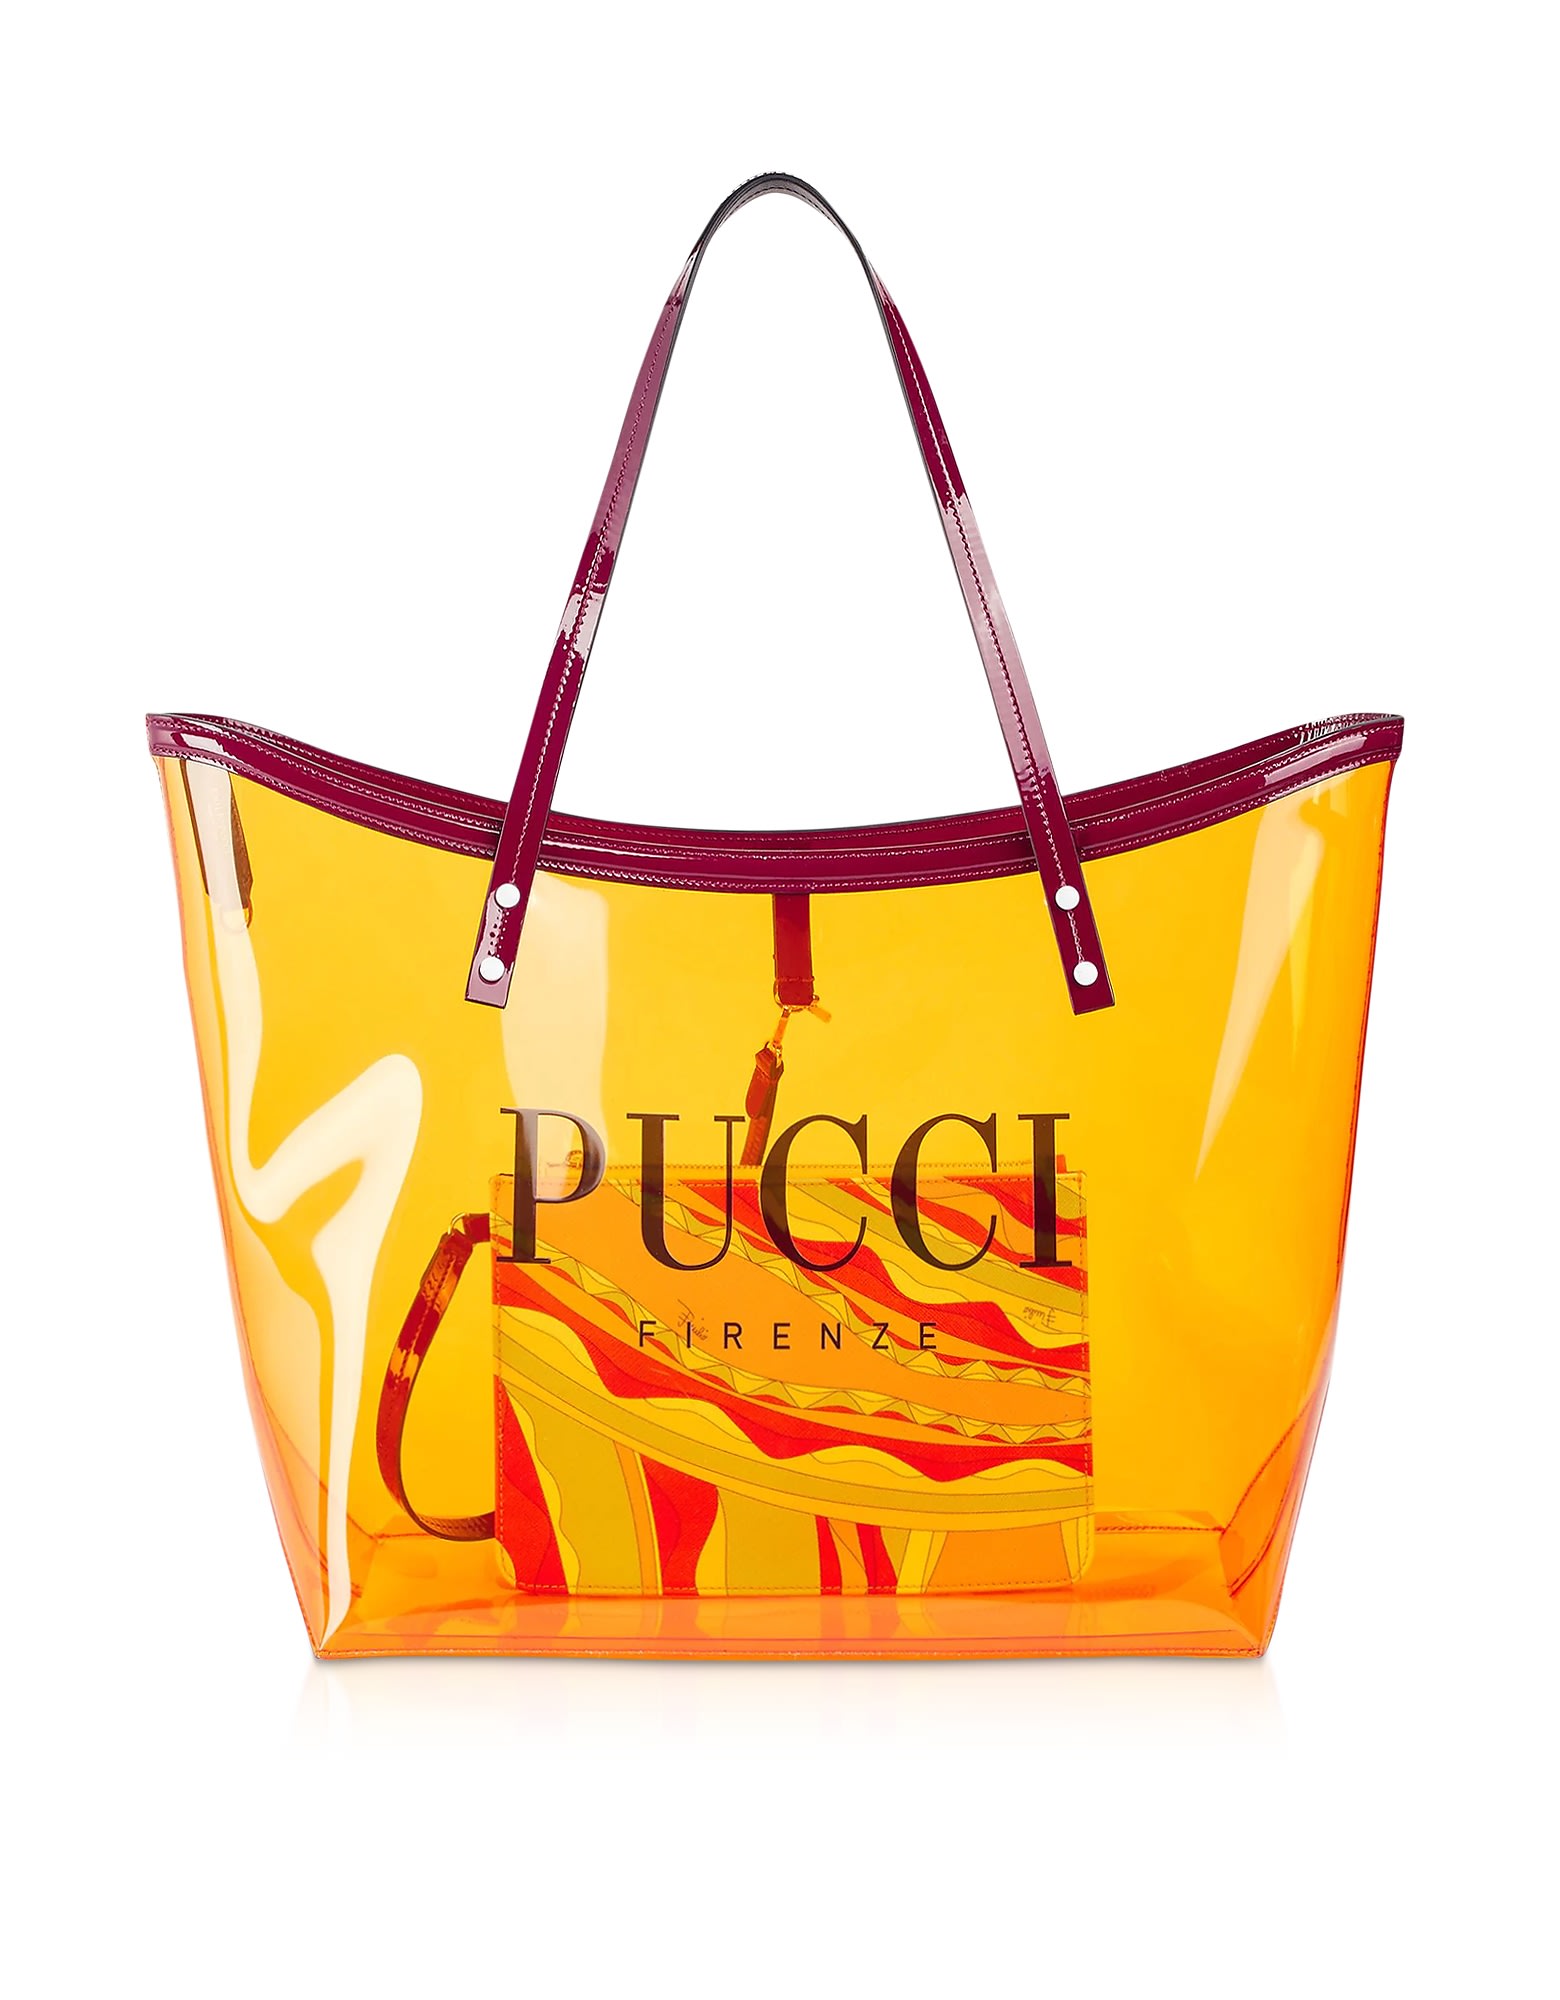 Emilio Pucci Tote Bag Top Sellers, UP TO 62% OFF | www.bravoplaya.com